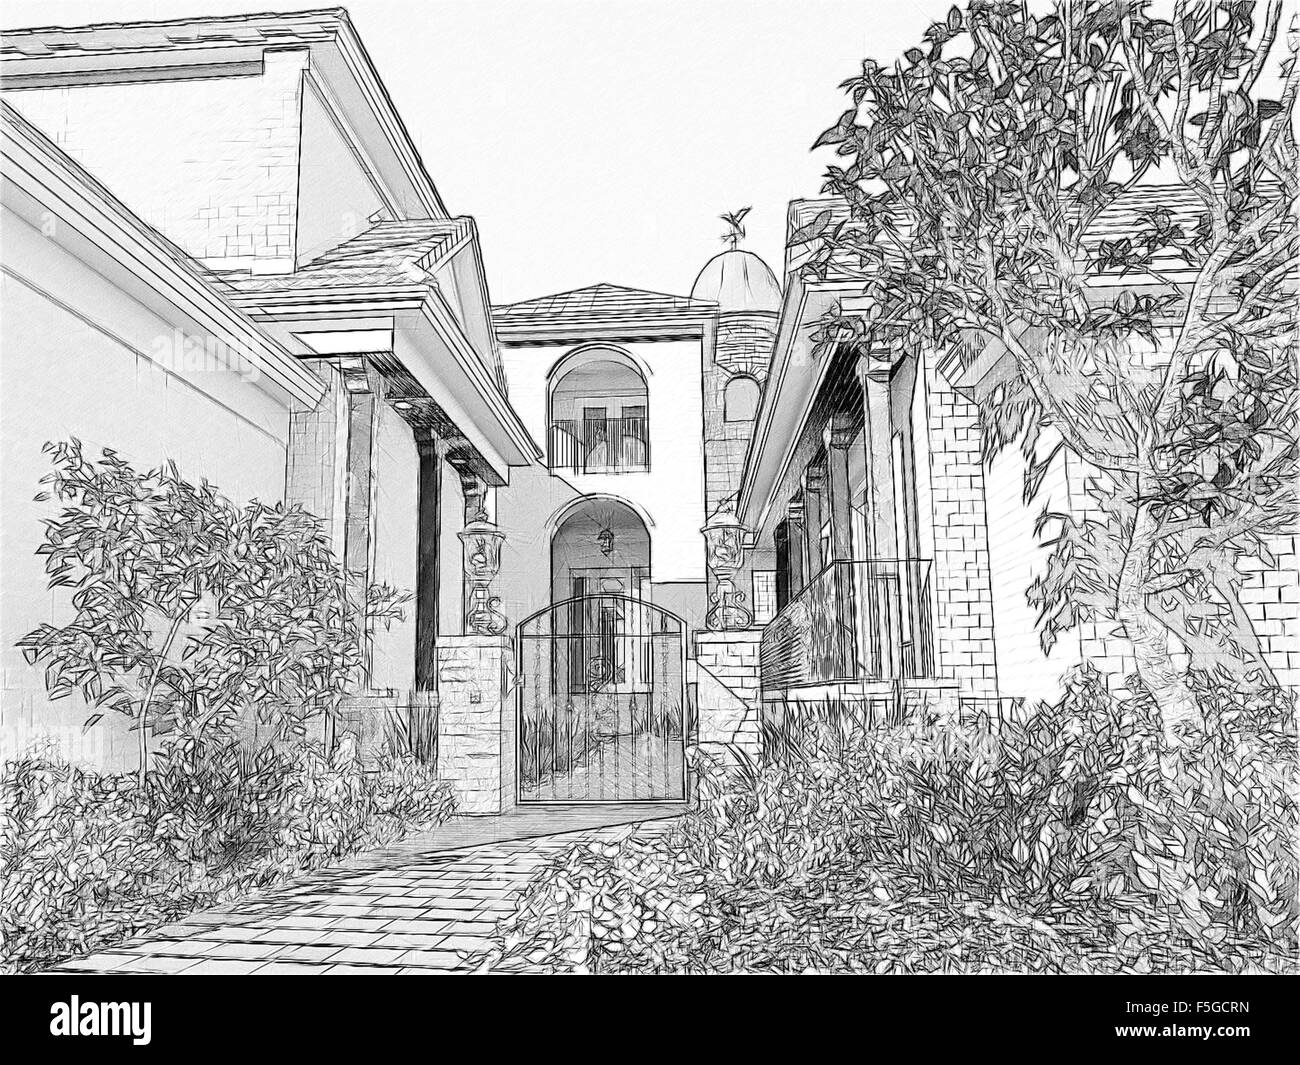 House Layout And Architectural Drawings Stock Photo